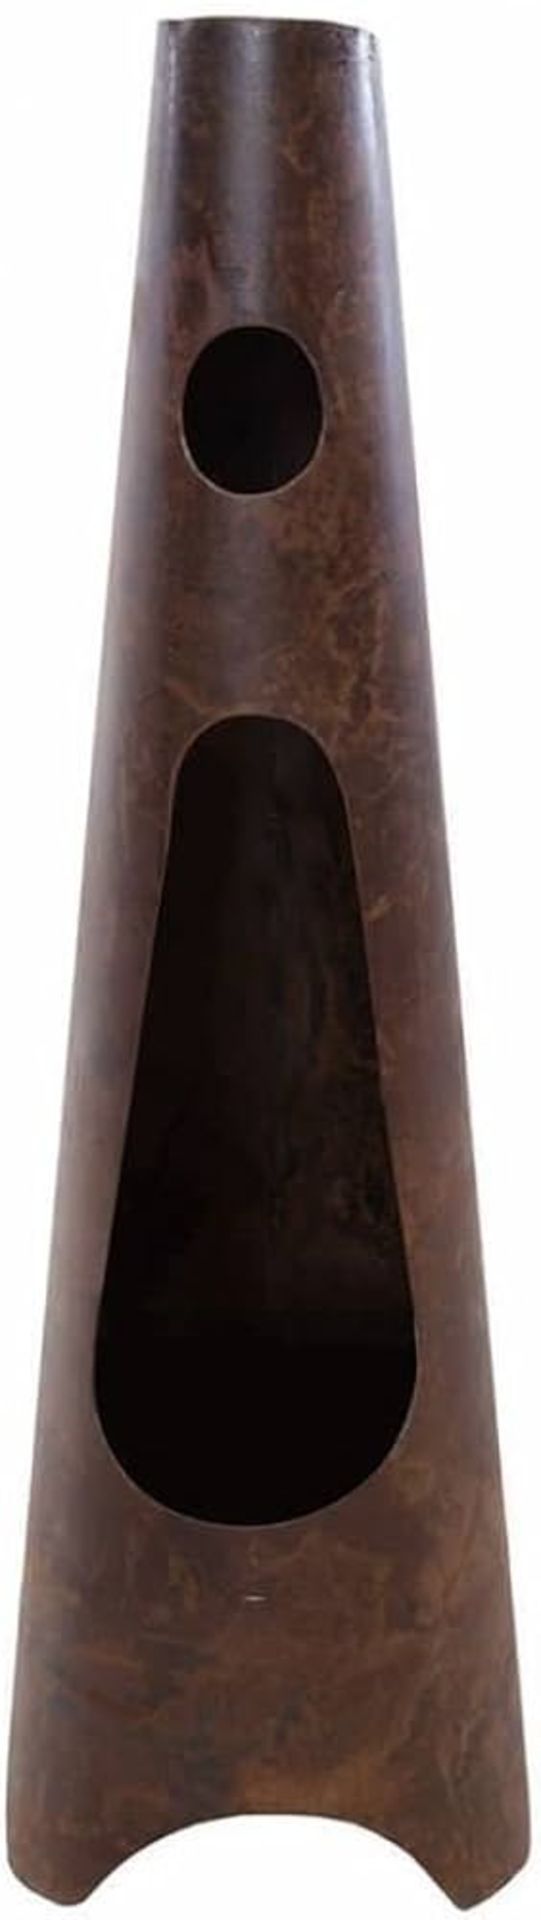 BRAND NEW REDFIRE THOR RUST CHIMINEA RRP £229 H/S